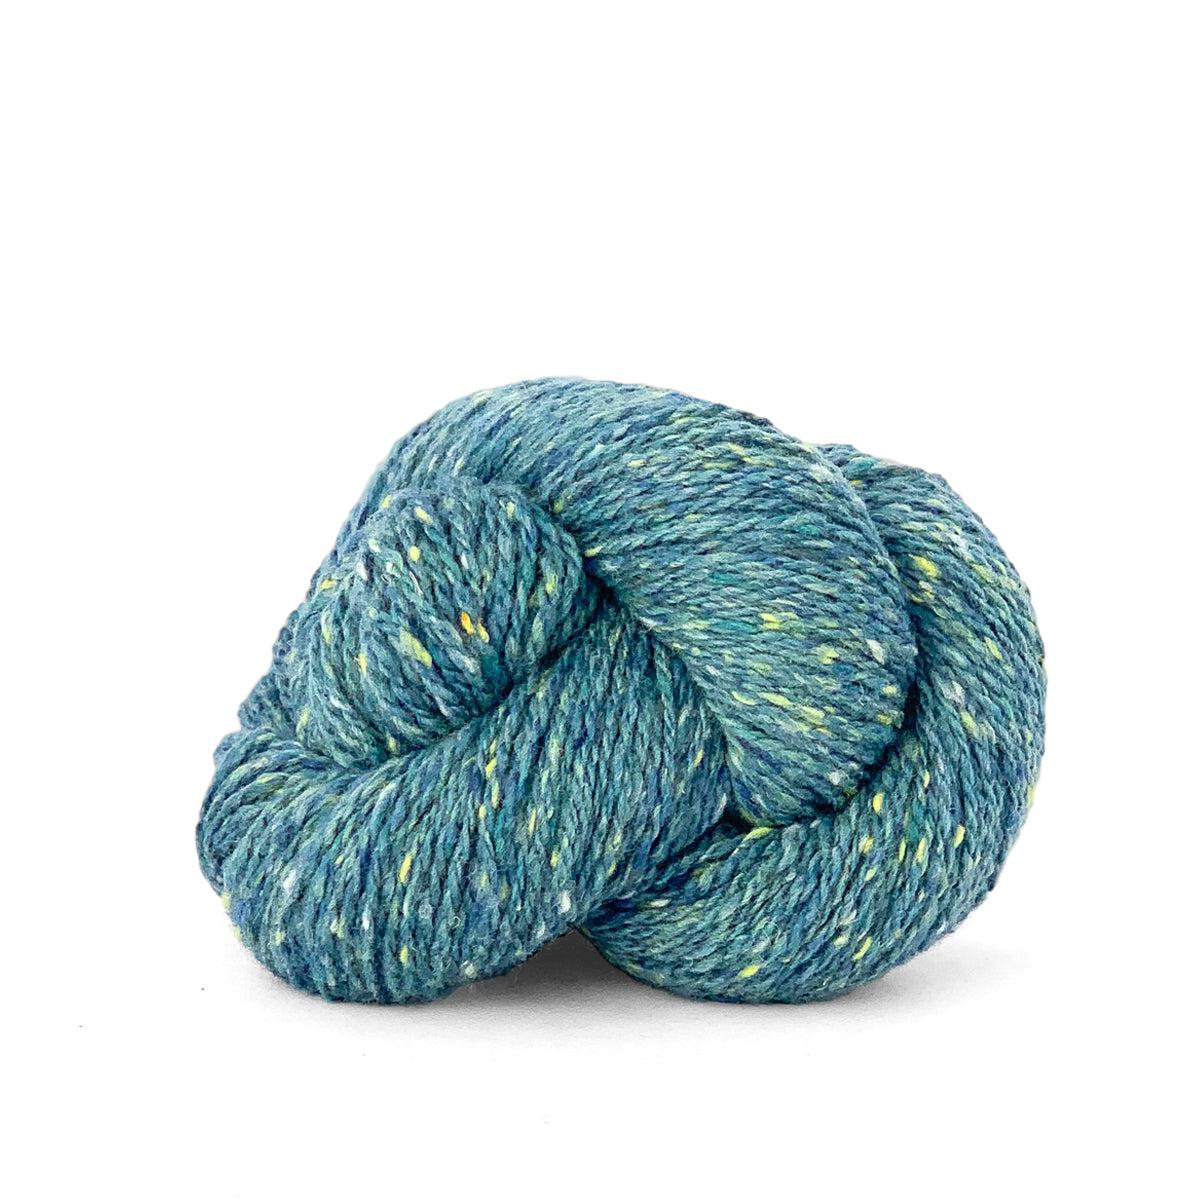 A skein of Kelbourne Woolens Lucky Tweed Seaglass, a light blue green with yellow and darker blue flecks. 